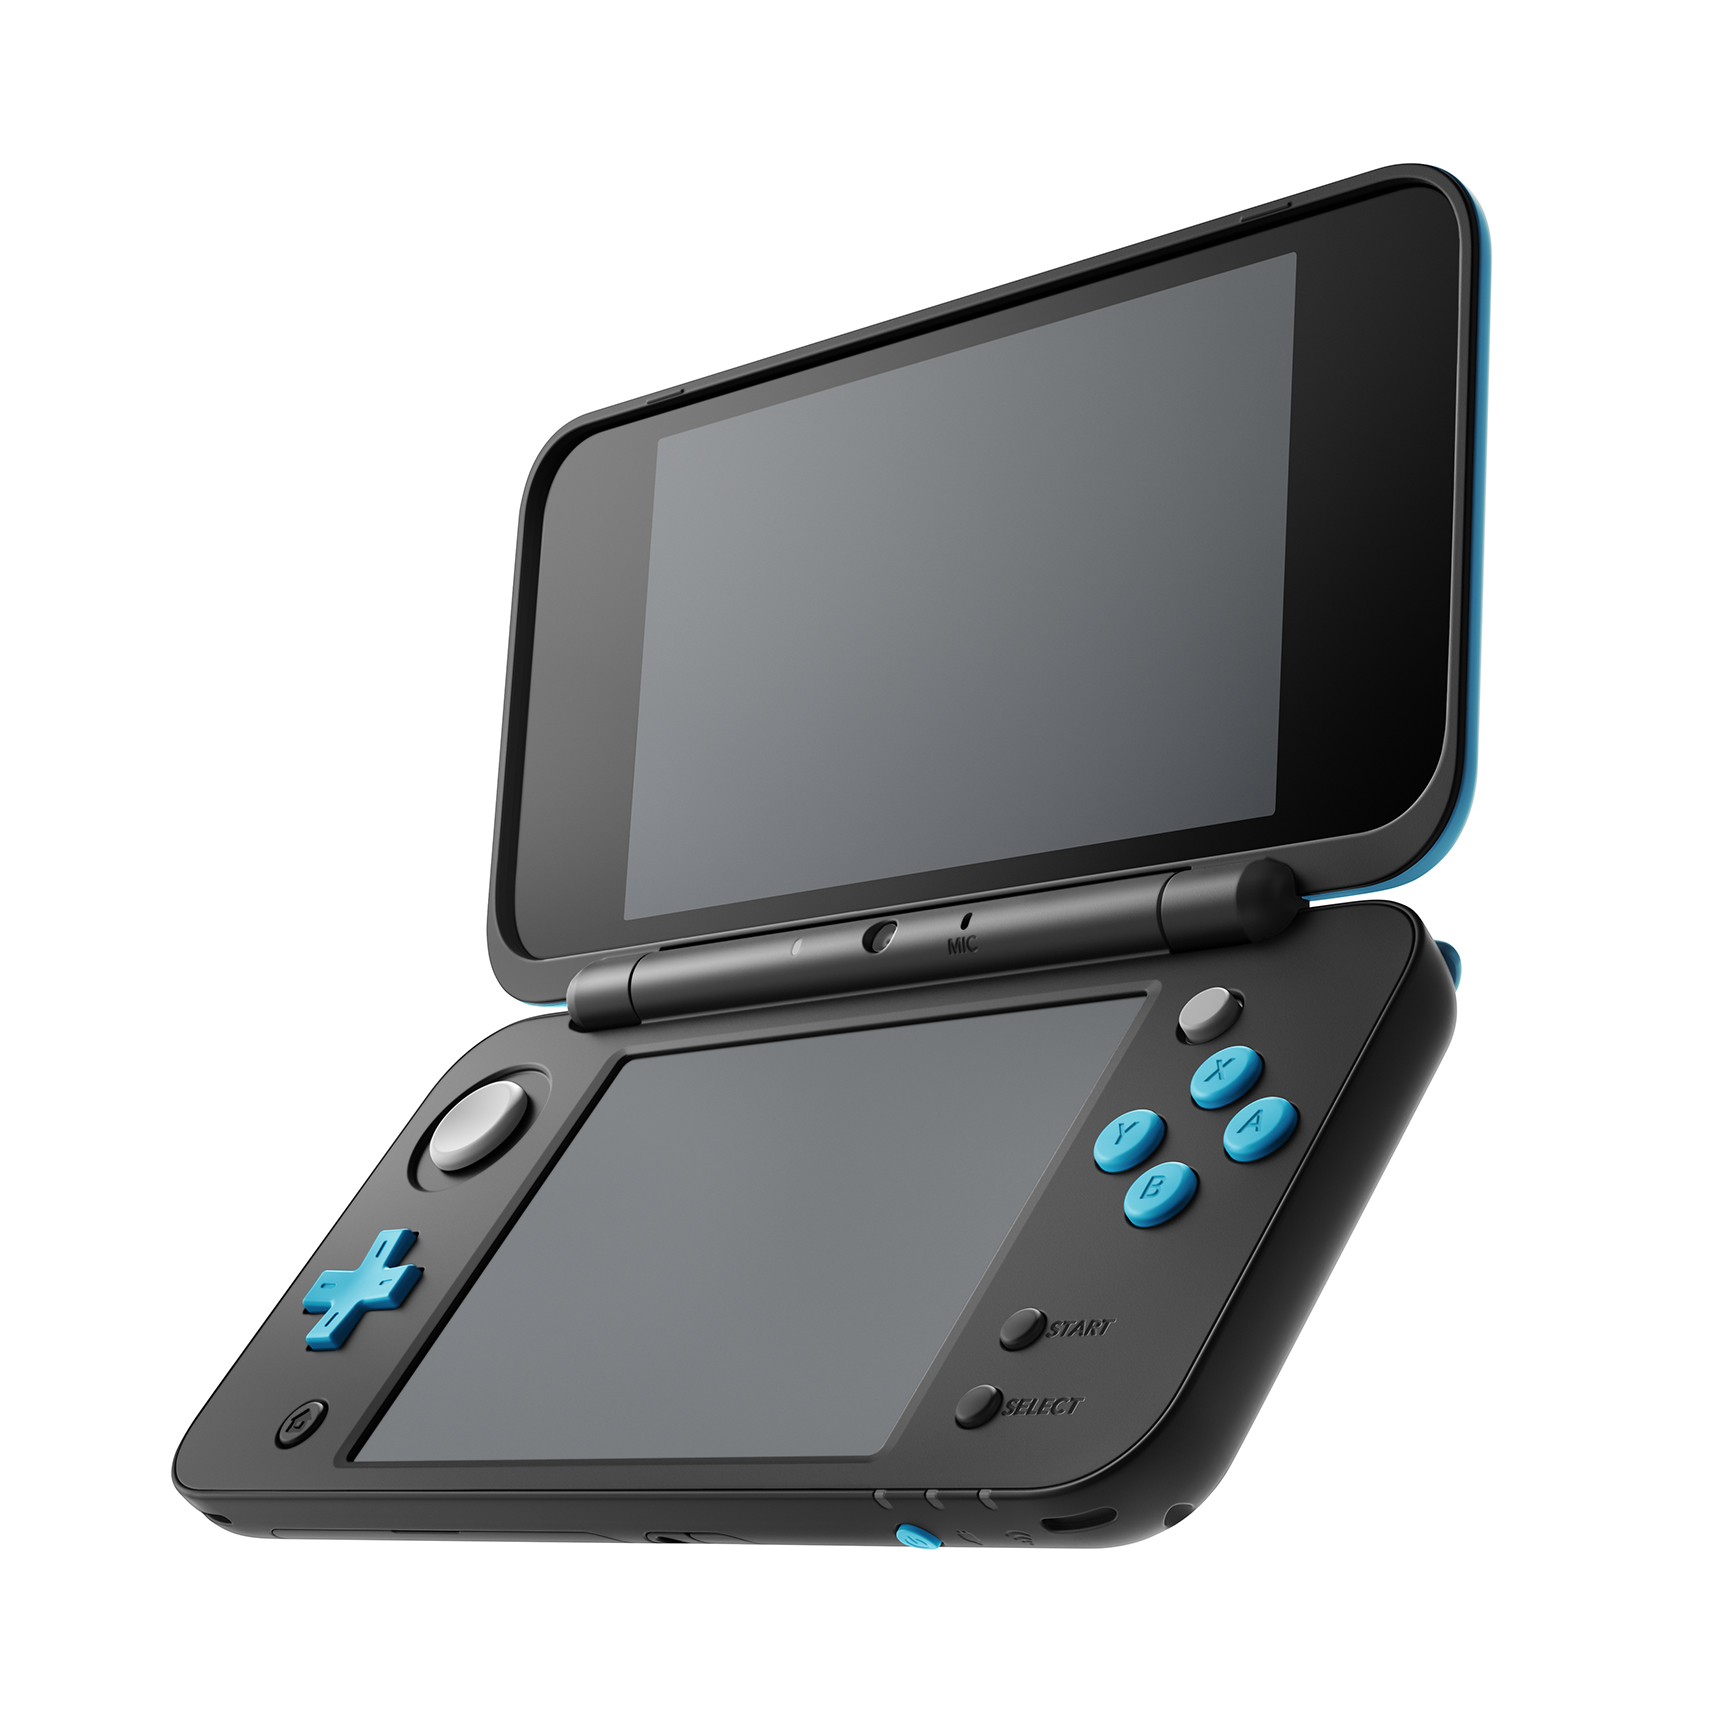 New Nintendo 2DS XL System w/ Mario Kart 7 Pre-installed, Black & Turquoise - image 3 of 6